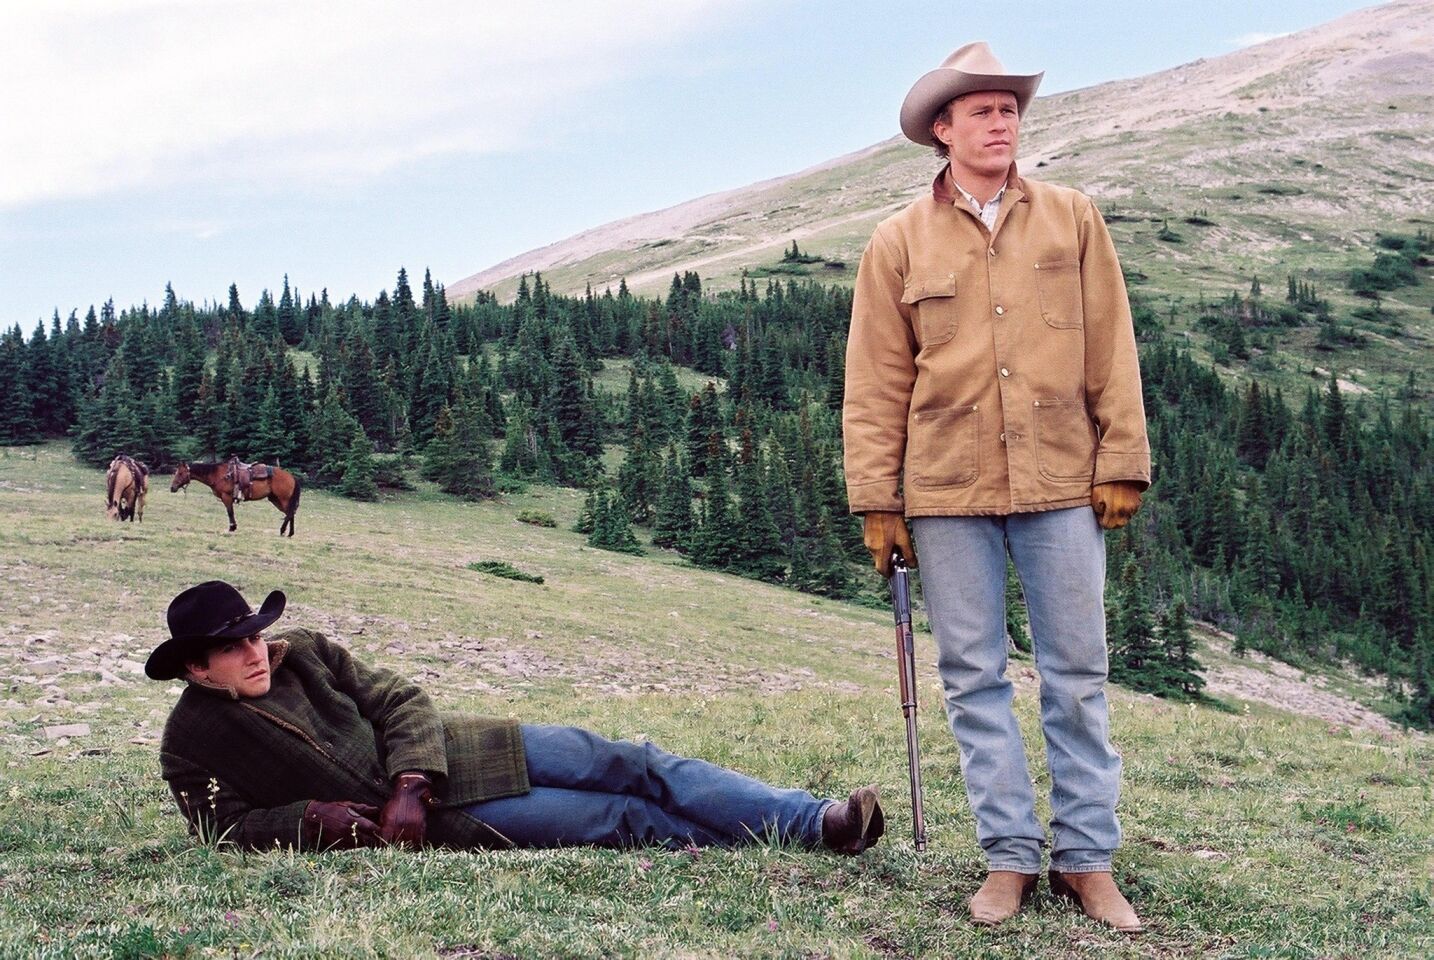 When it opened in 2005, Focus Features' "Brokeback Mountain" generated buzz for pushing boundaries of the western genre, though it ultimately lost the best picture Oscar to "Crash." Domestic gross: $83,025,853.